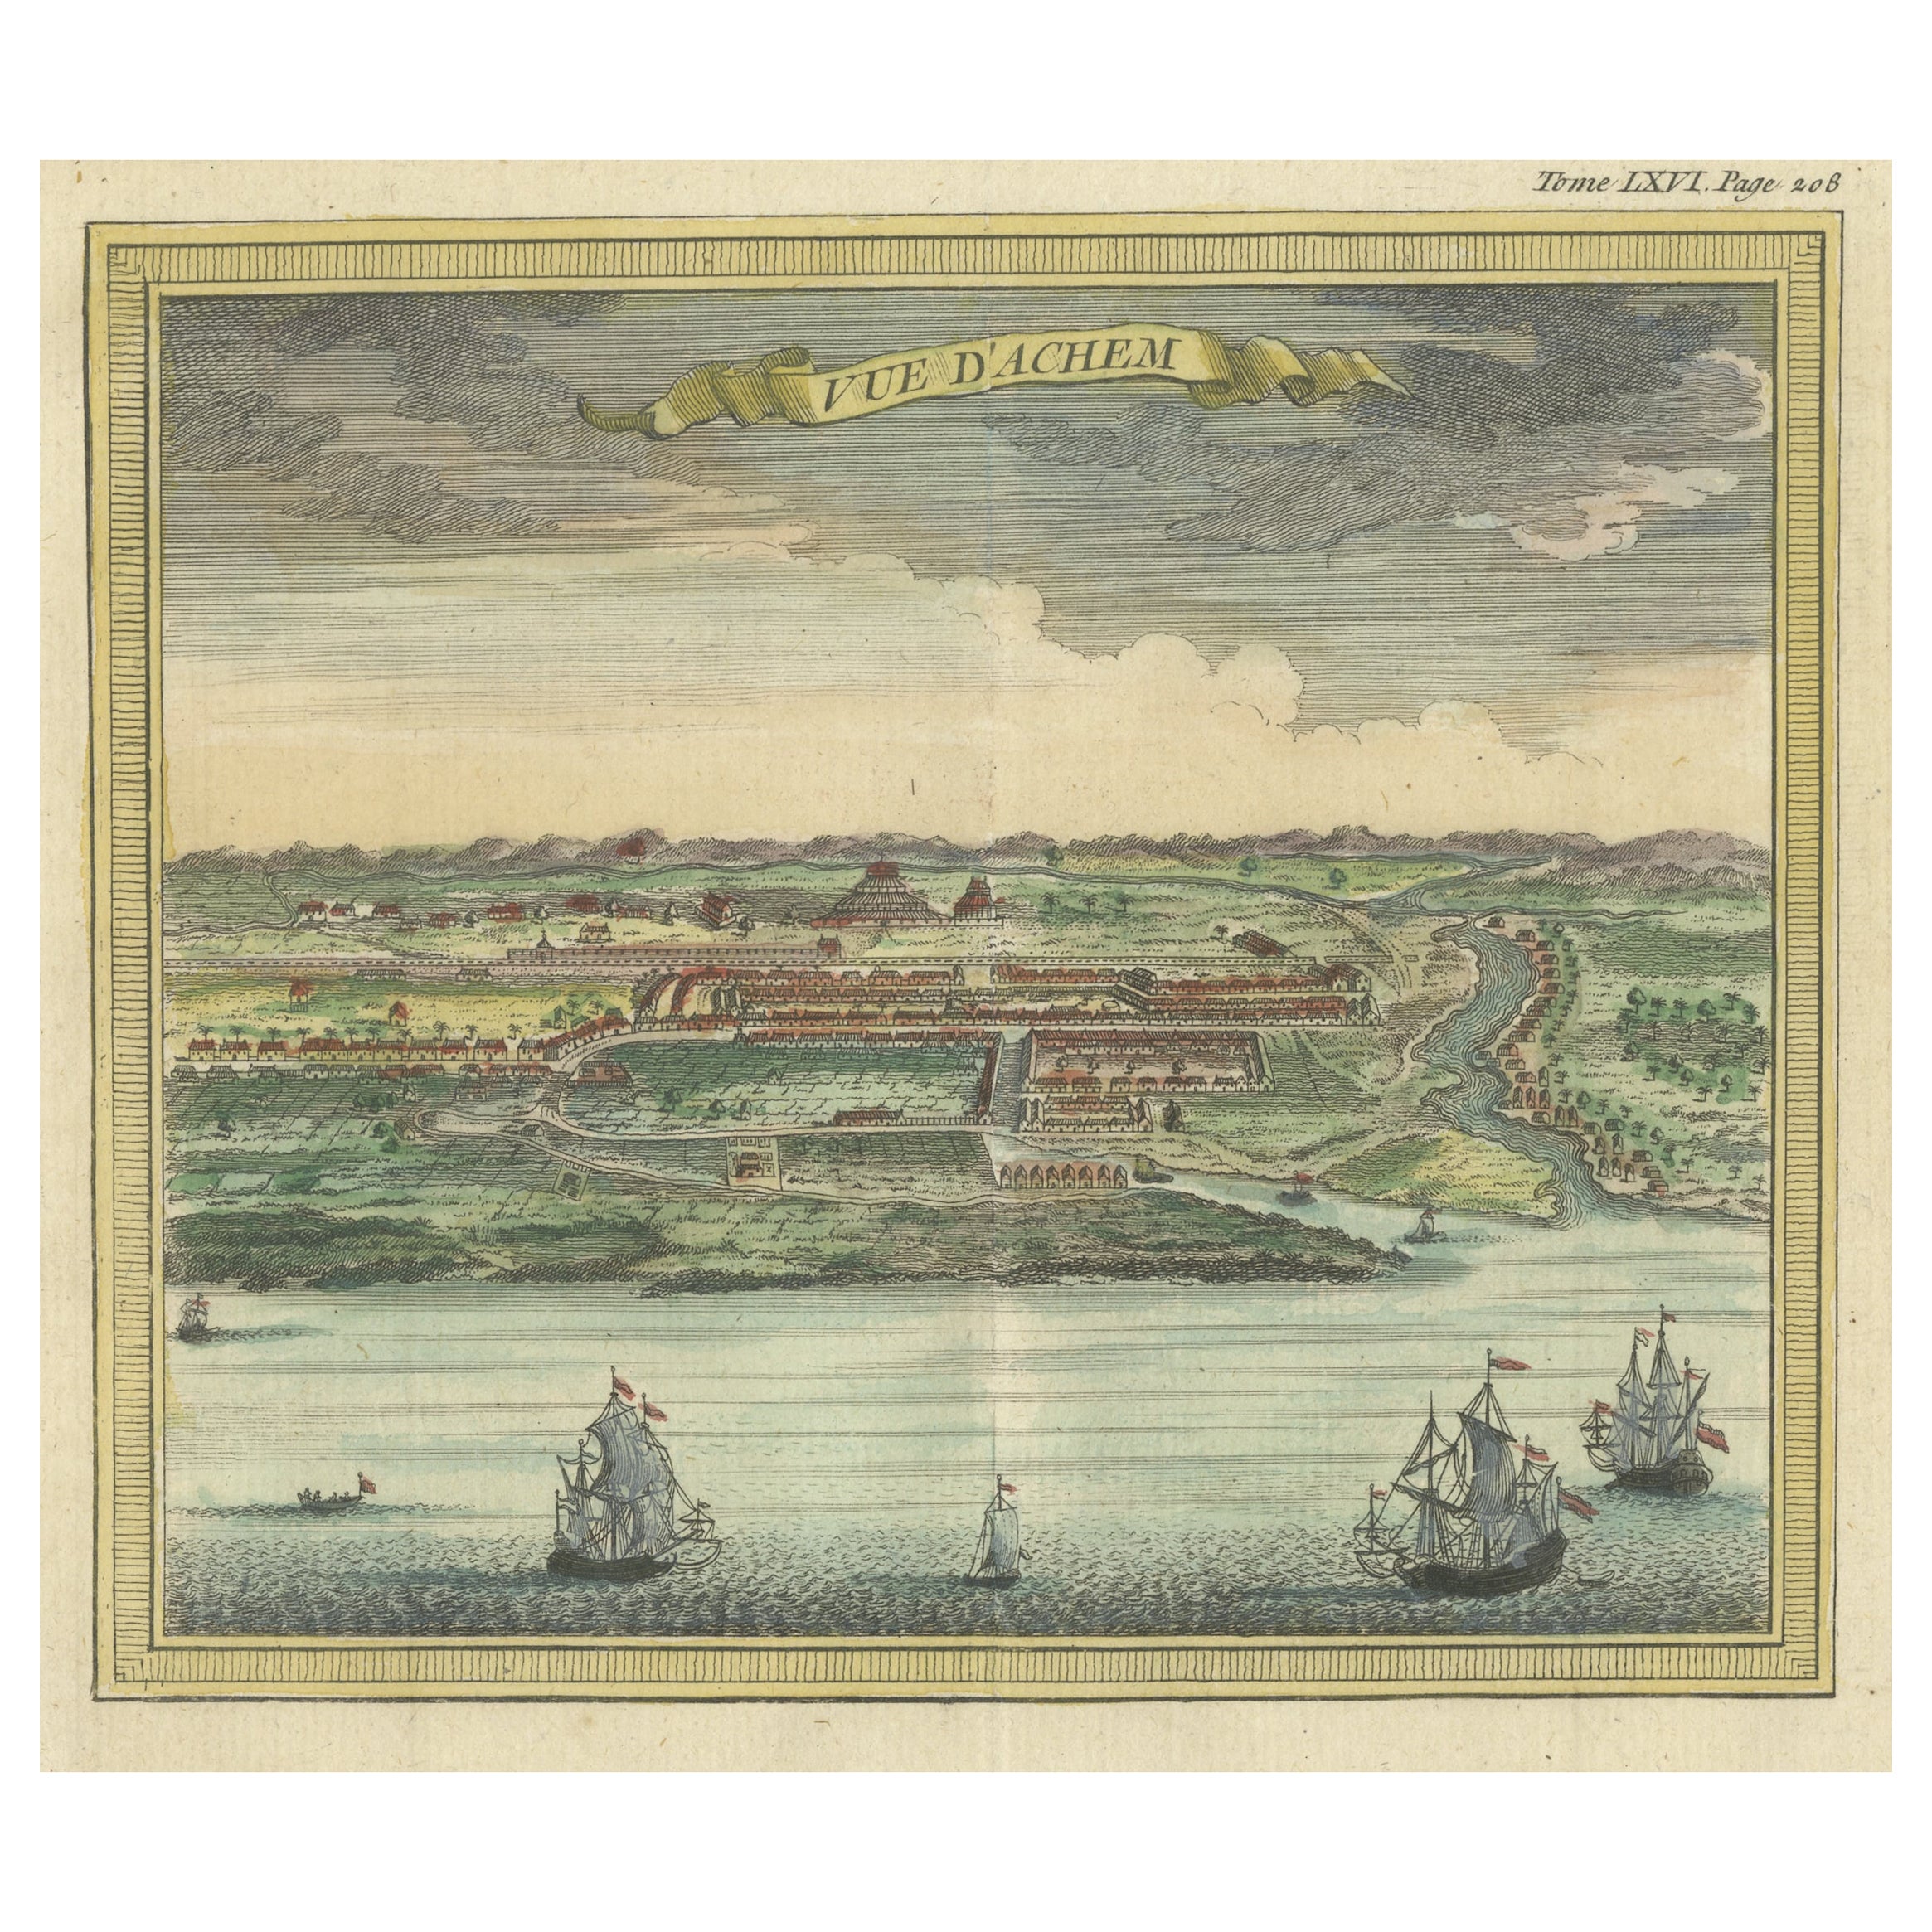 Antique Print with a View of Aceh, Sumatra in Indonesia